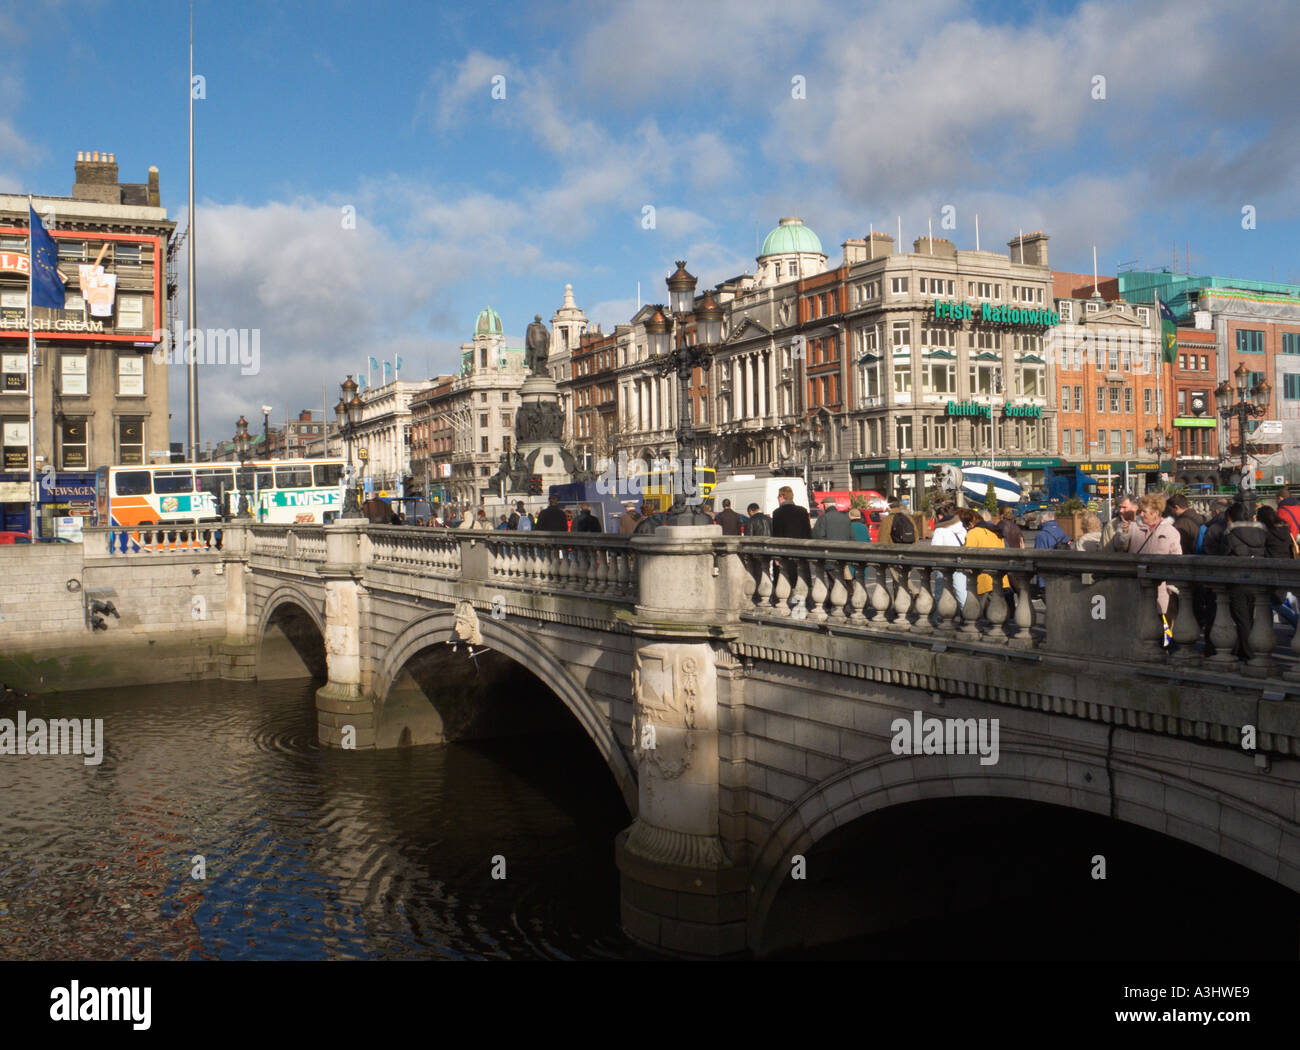 Crowded O'Connell Bridge looking towards O'Connell Street Lower, River Liffey, Dublin, Ireland Stock Photo